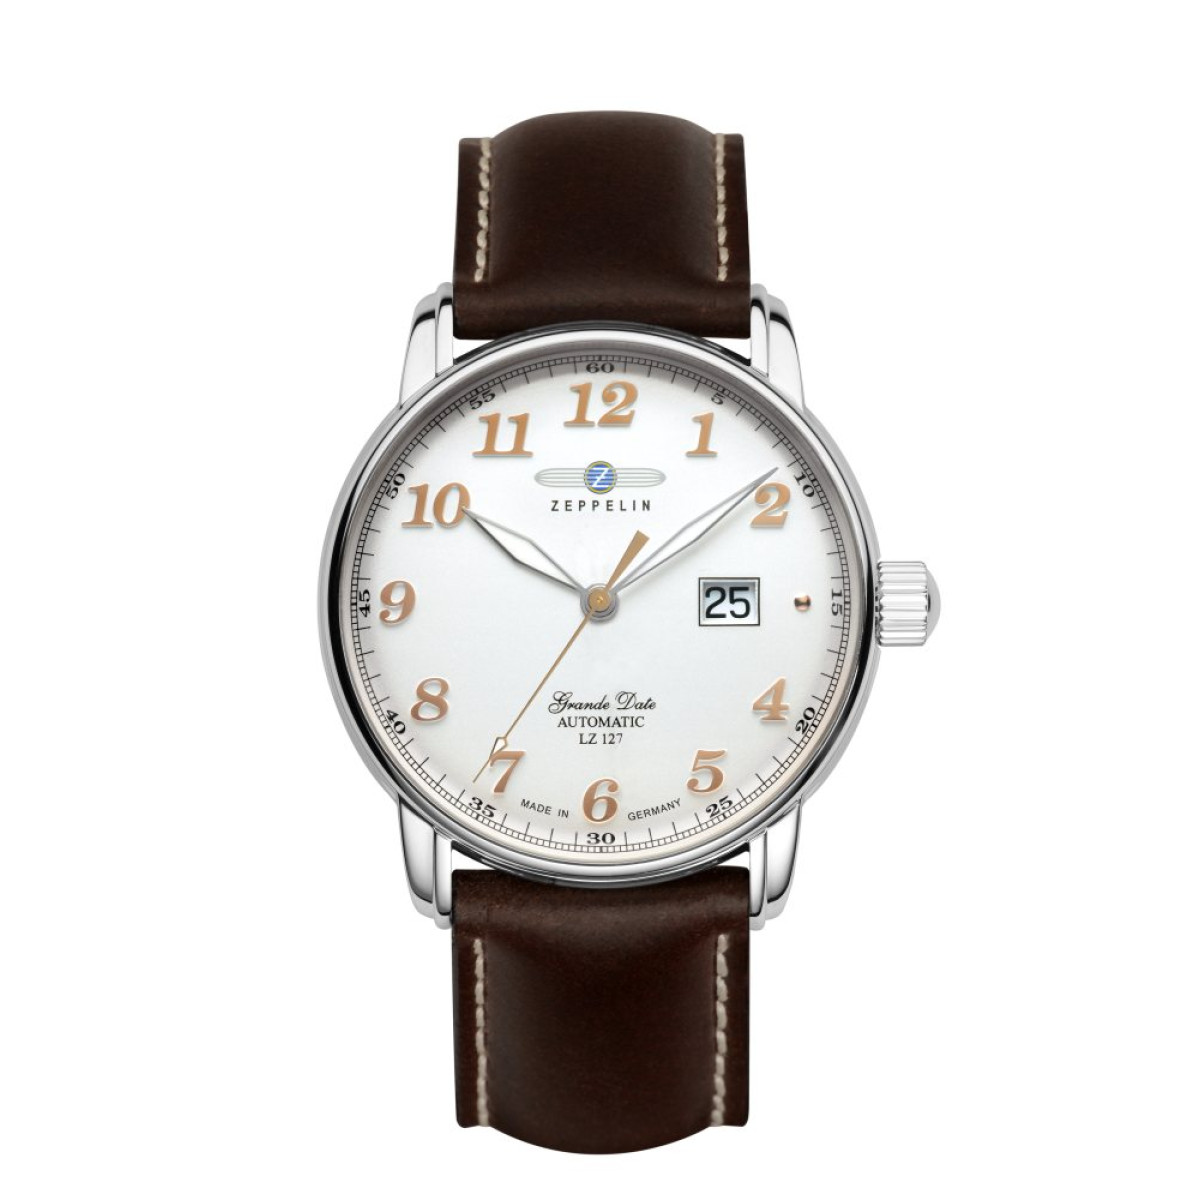 LZ127 Graf Zeppelin Automatic with leather strap